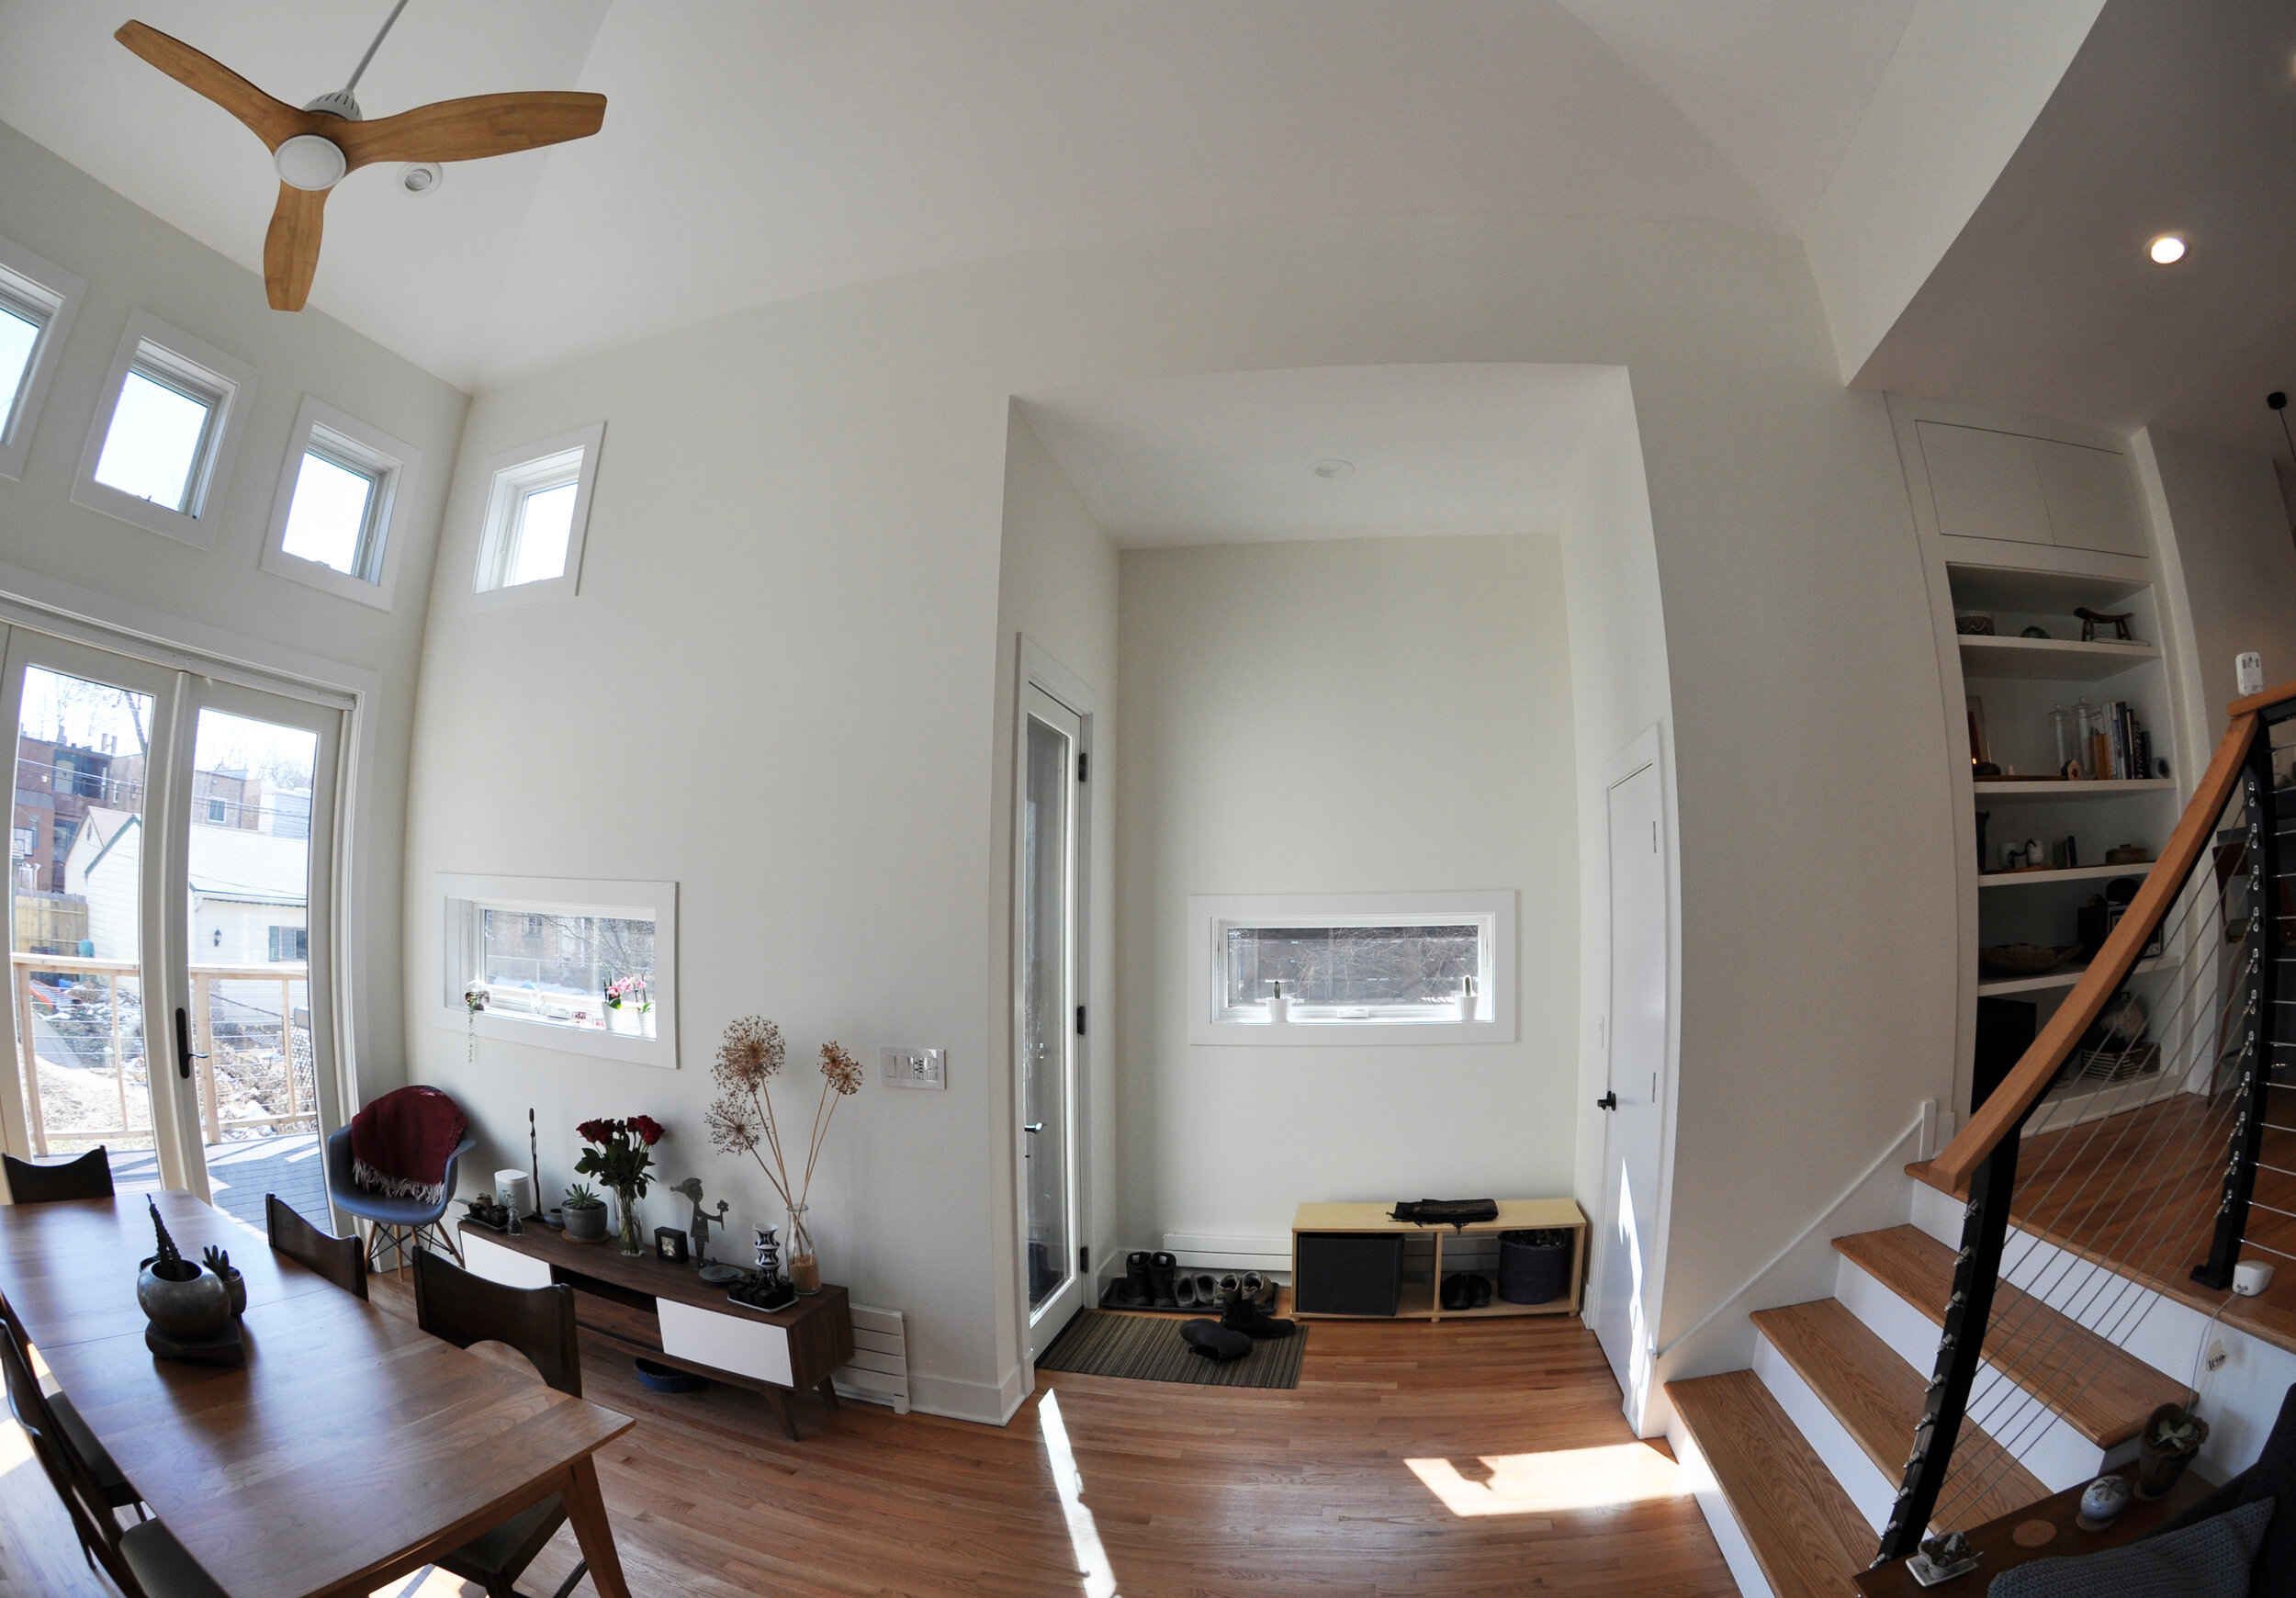 fisheye view of living space with tall ceilings, french doors, many windows